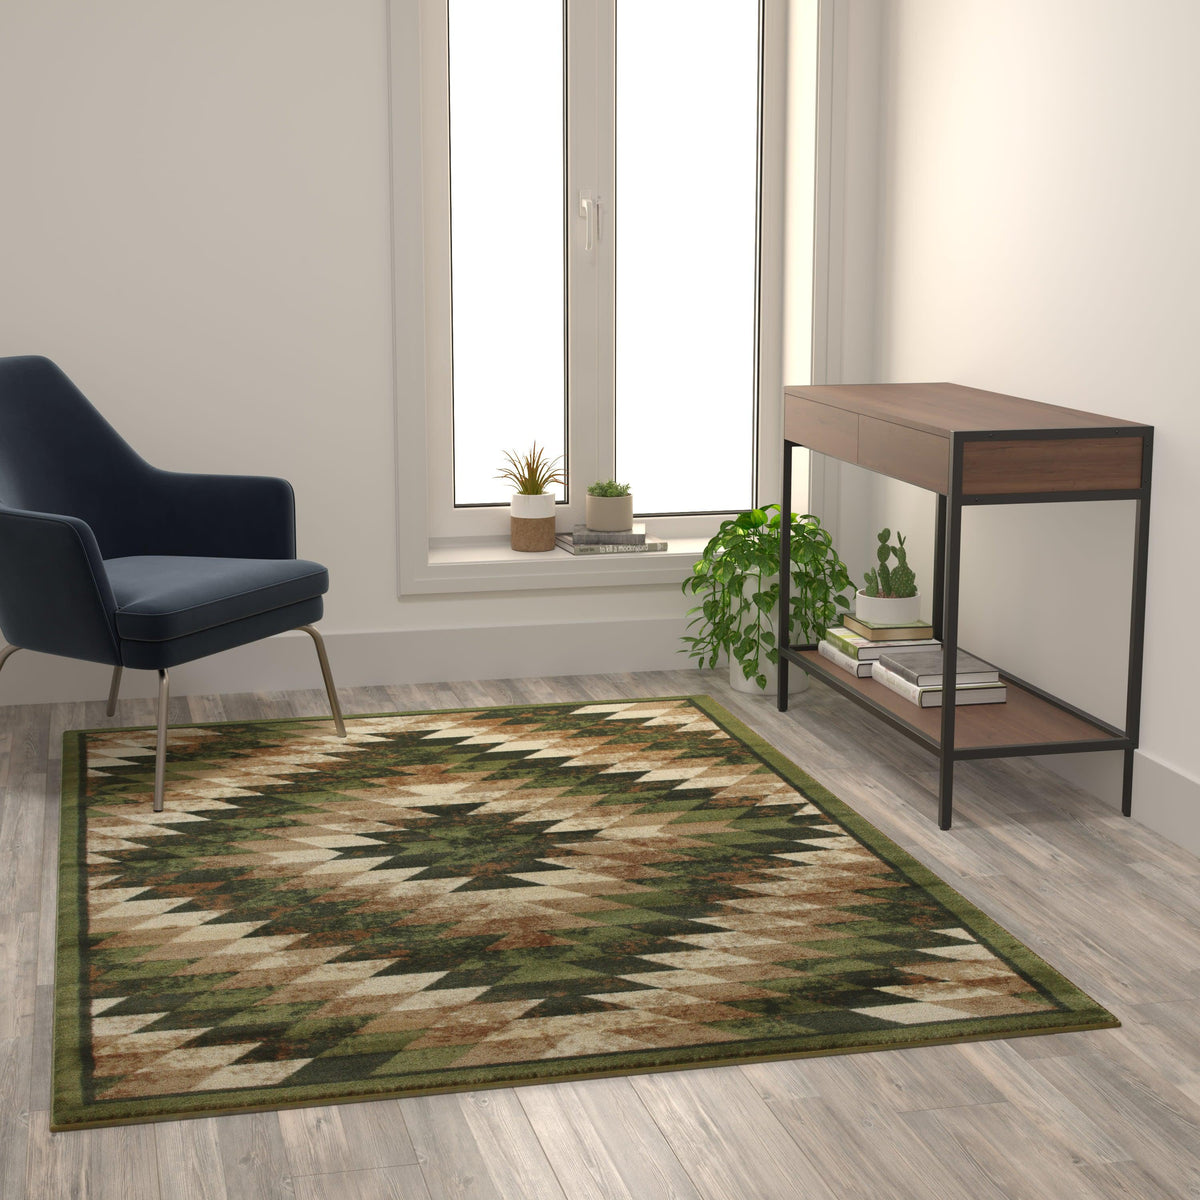 Green,5' x 7' |#| Southwestern Style Diamond Patterned Indoor Area Rug - Green - 5' x 7'